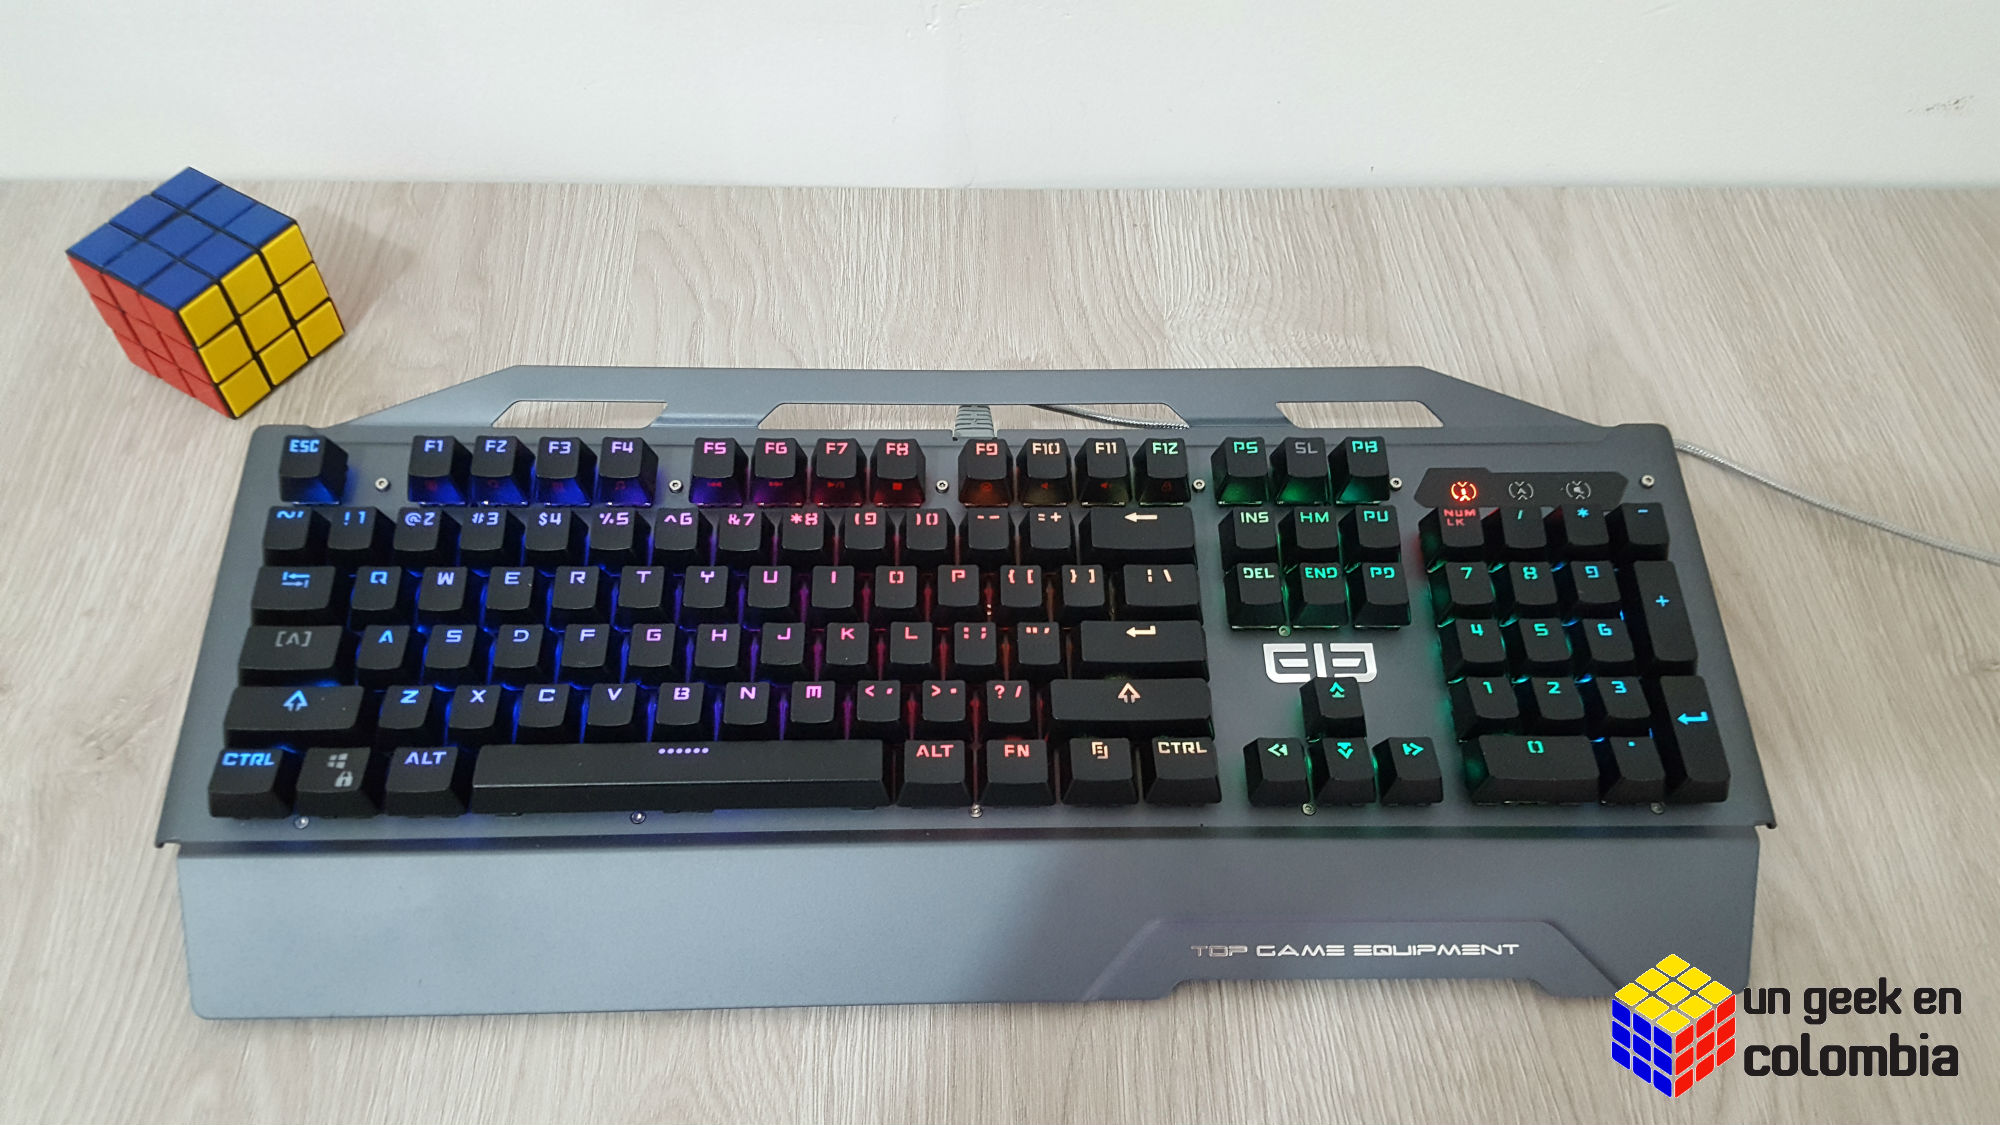 Review ELE EleEnter Game 2 a mechanical keyboard with a comfortable price and excellent features